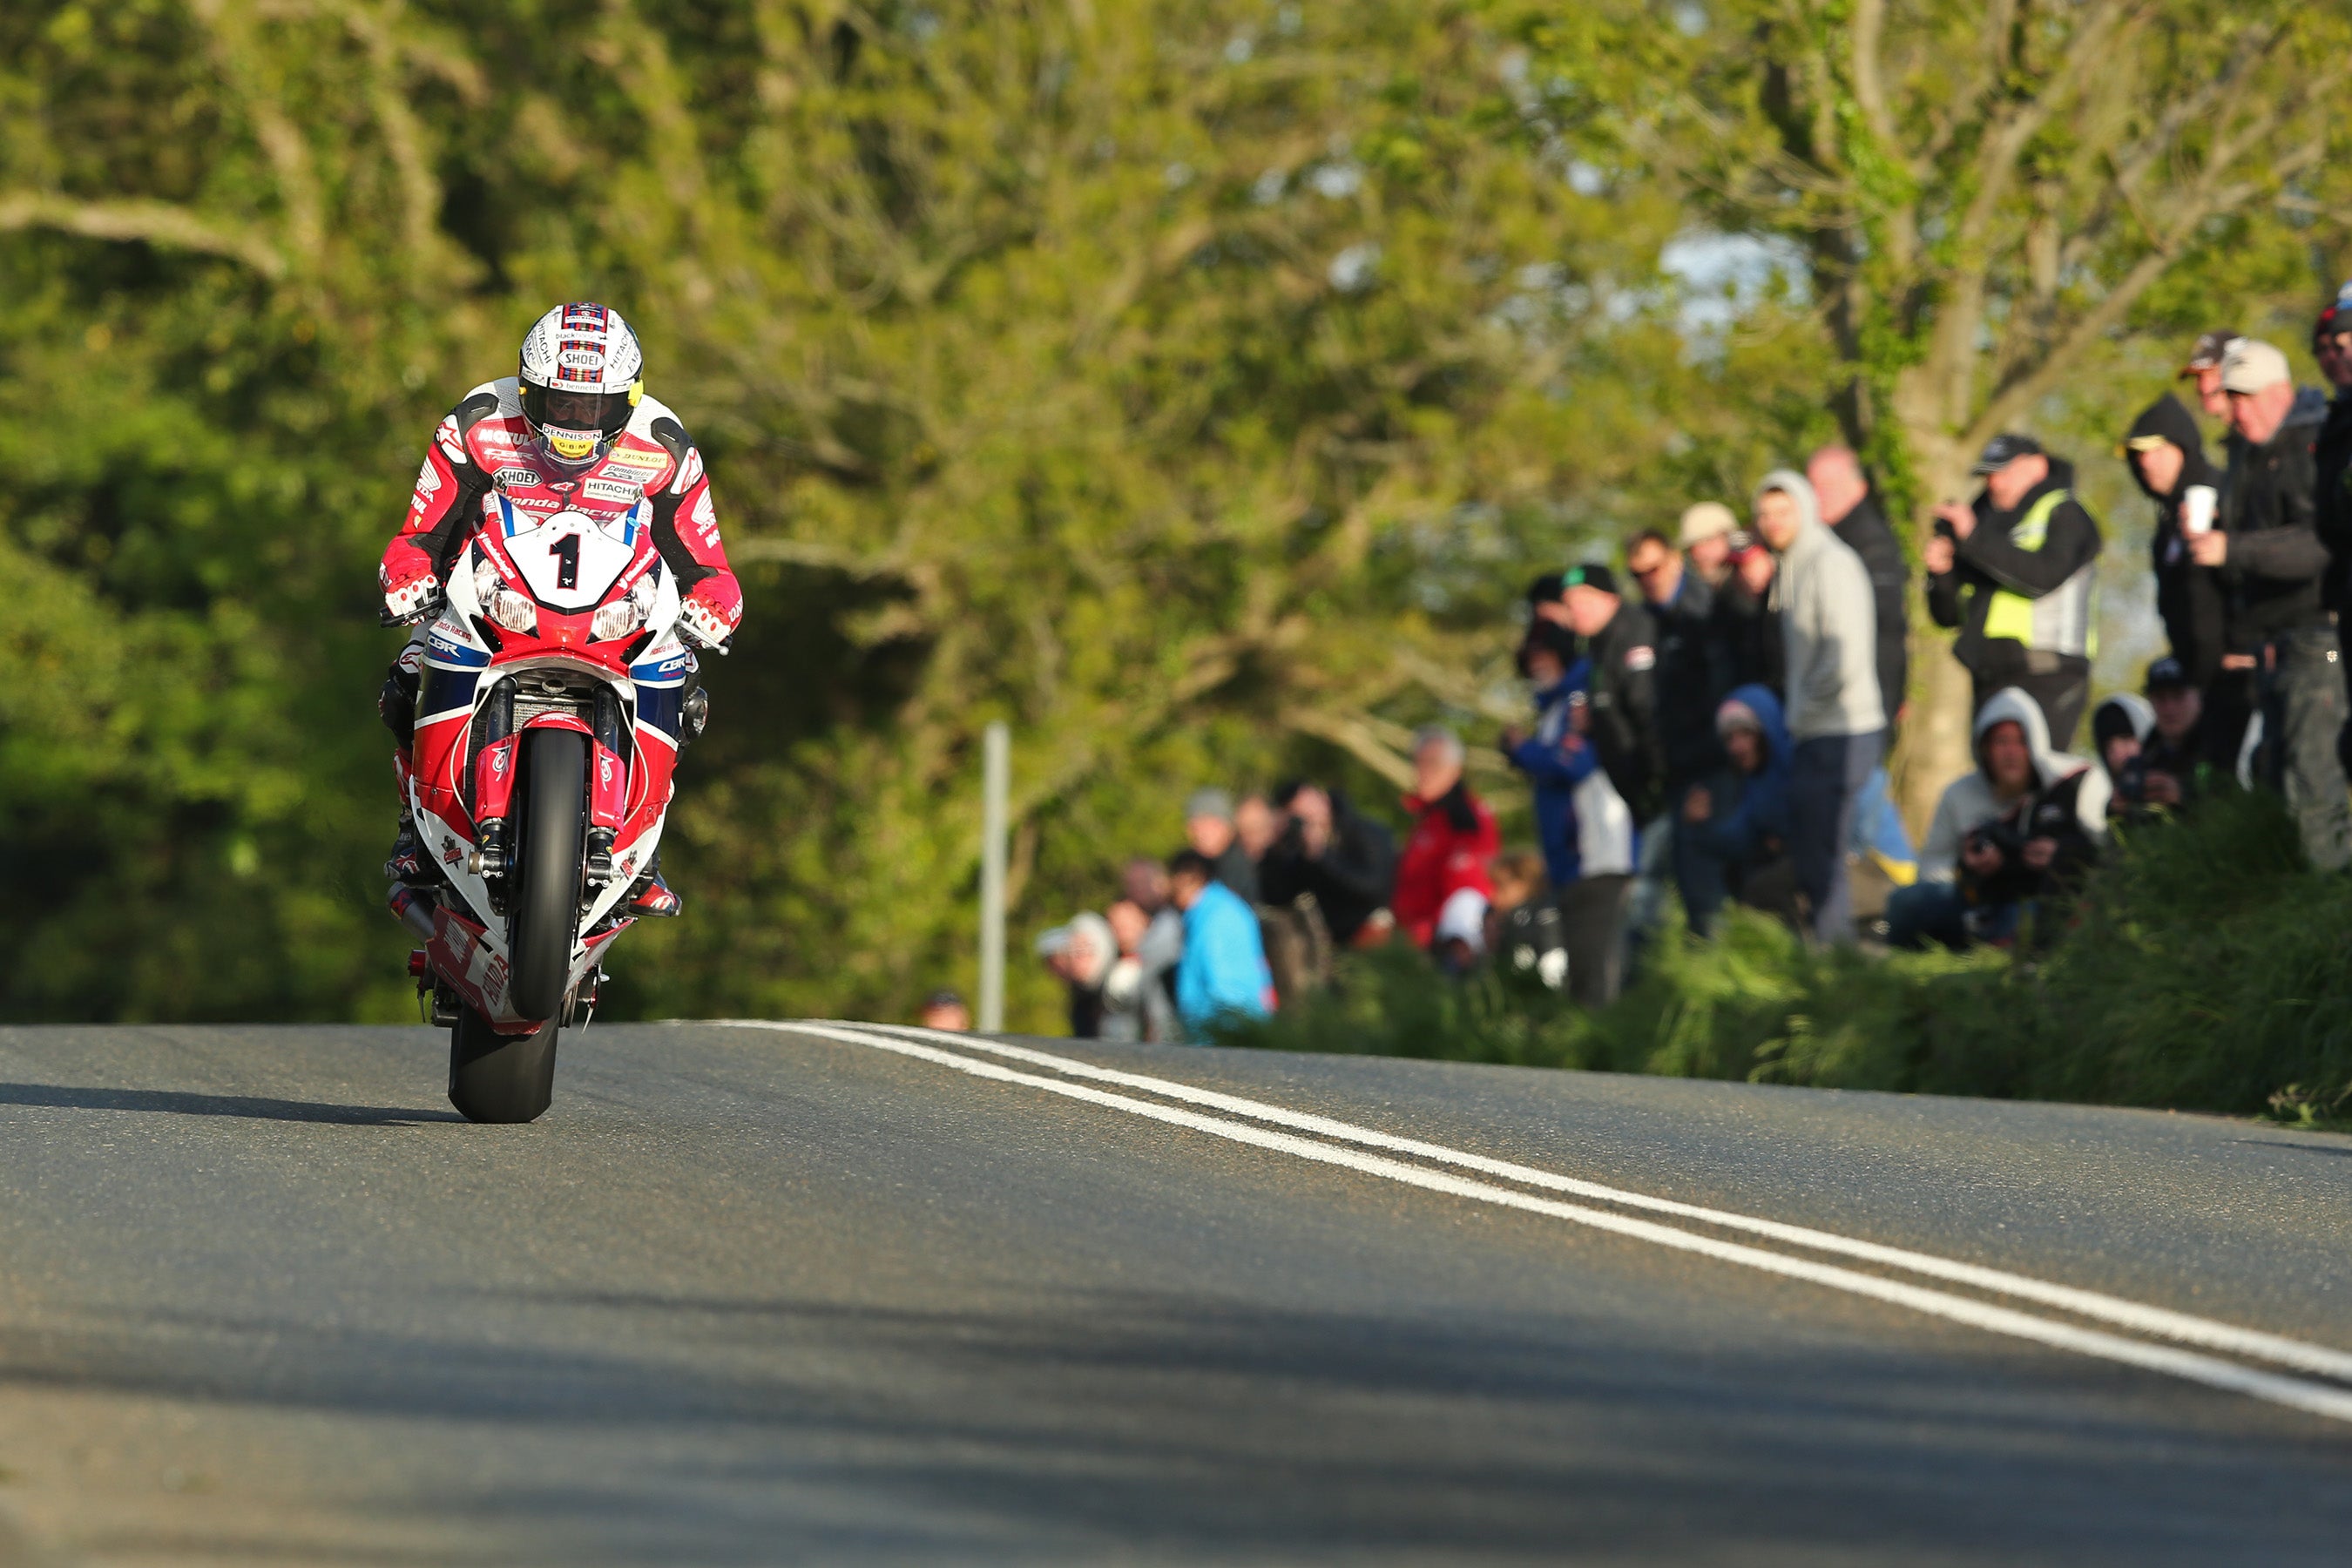 Bikes reach speeds of nearly 200 mph during a lap of the TT course